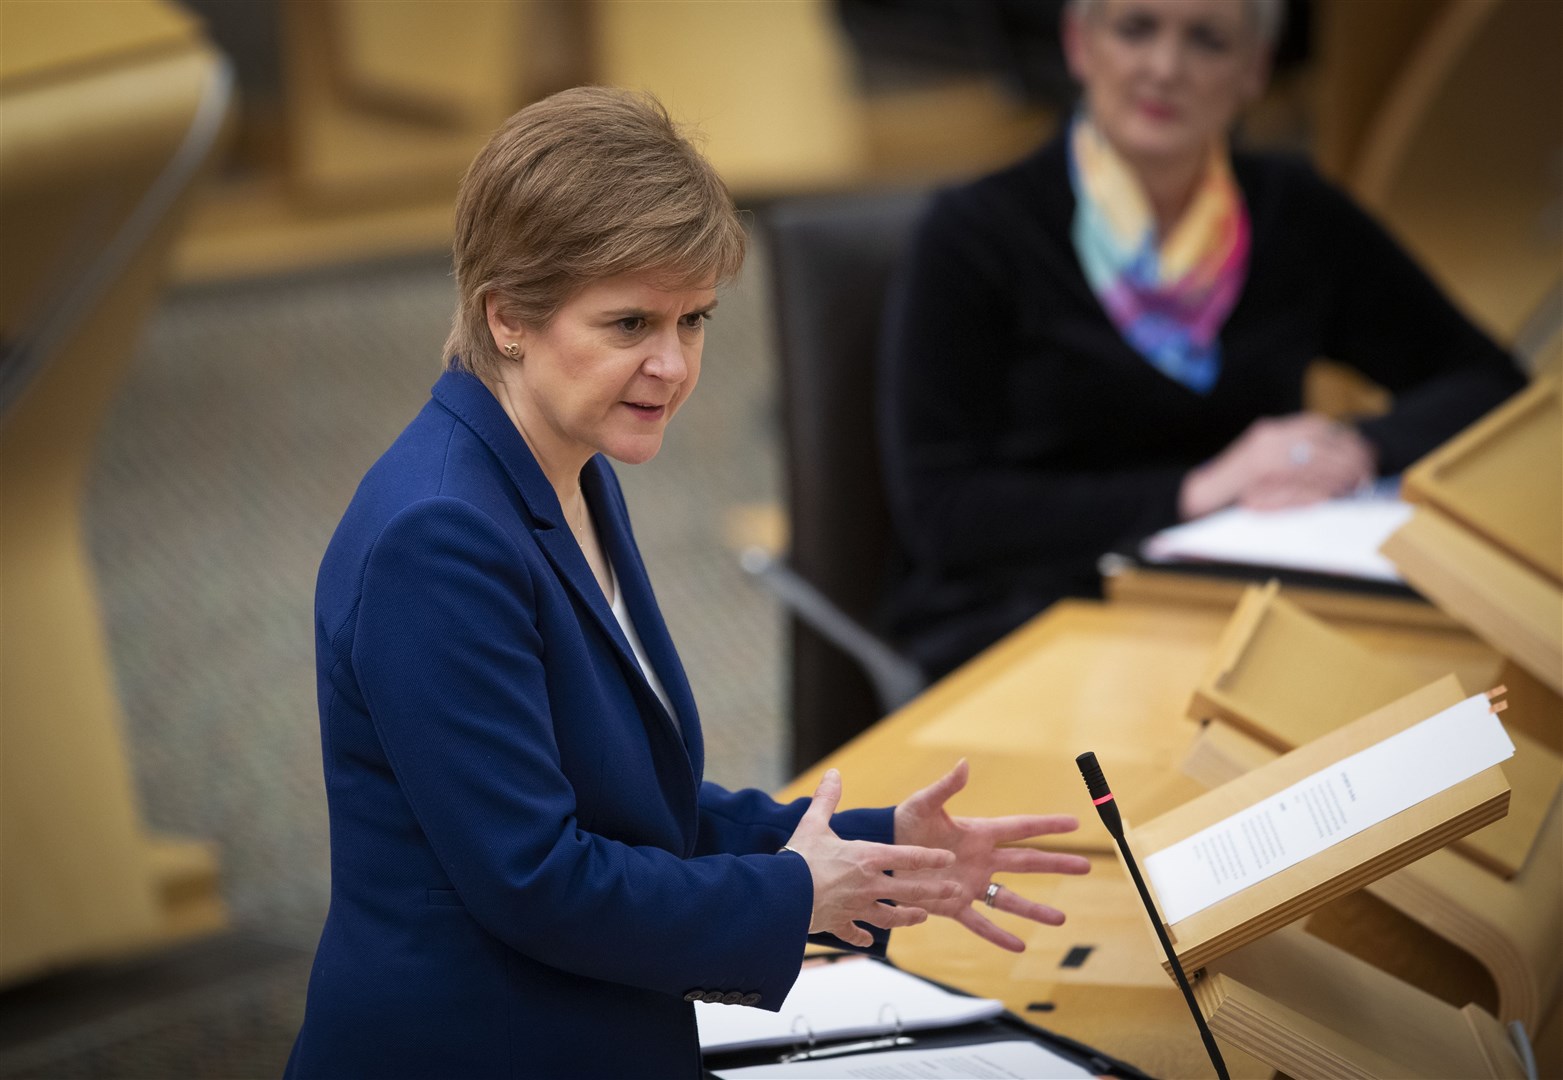 The First Minister said politicians ‘have a duty to lead by example’ (Jane Barlow/PA)